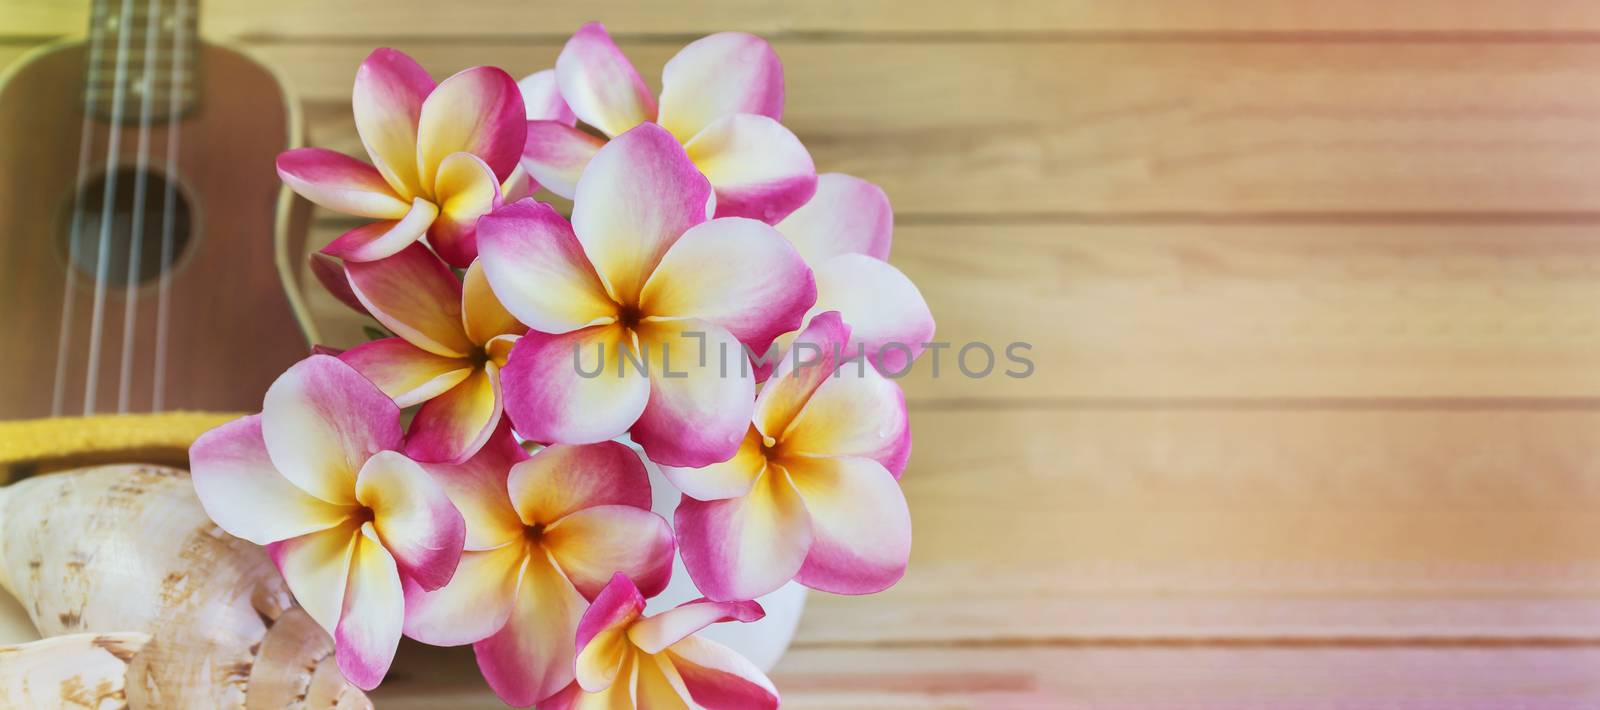 Pink yellow and white flowers bunch plumeria or frangipani in vase, with ukulele background on wooden table  and fresh summer mood with blank area for text, frangipani or plumeria decoration in tropical summer feeling